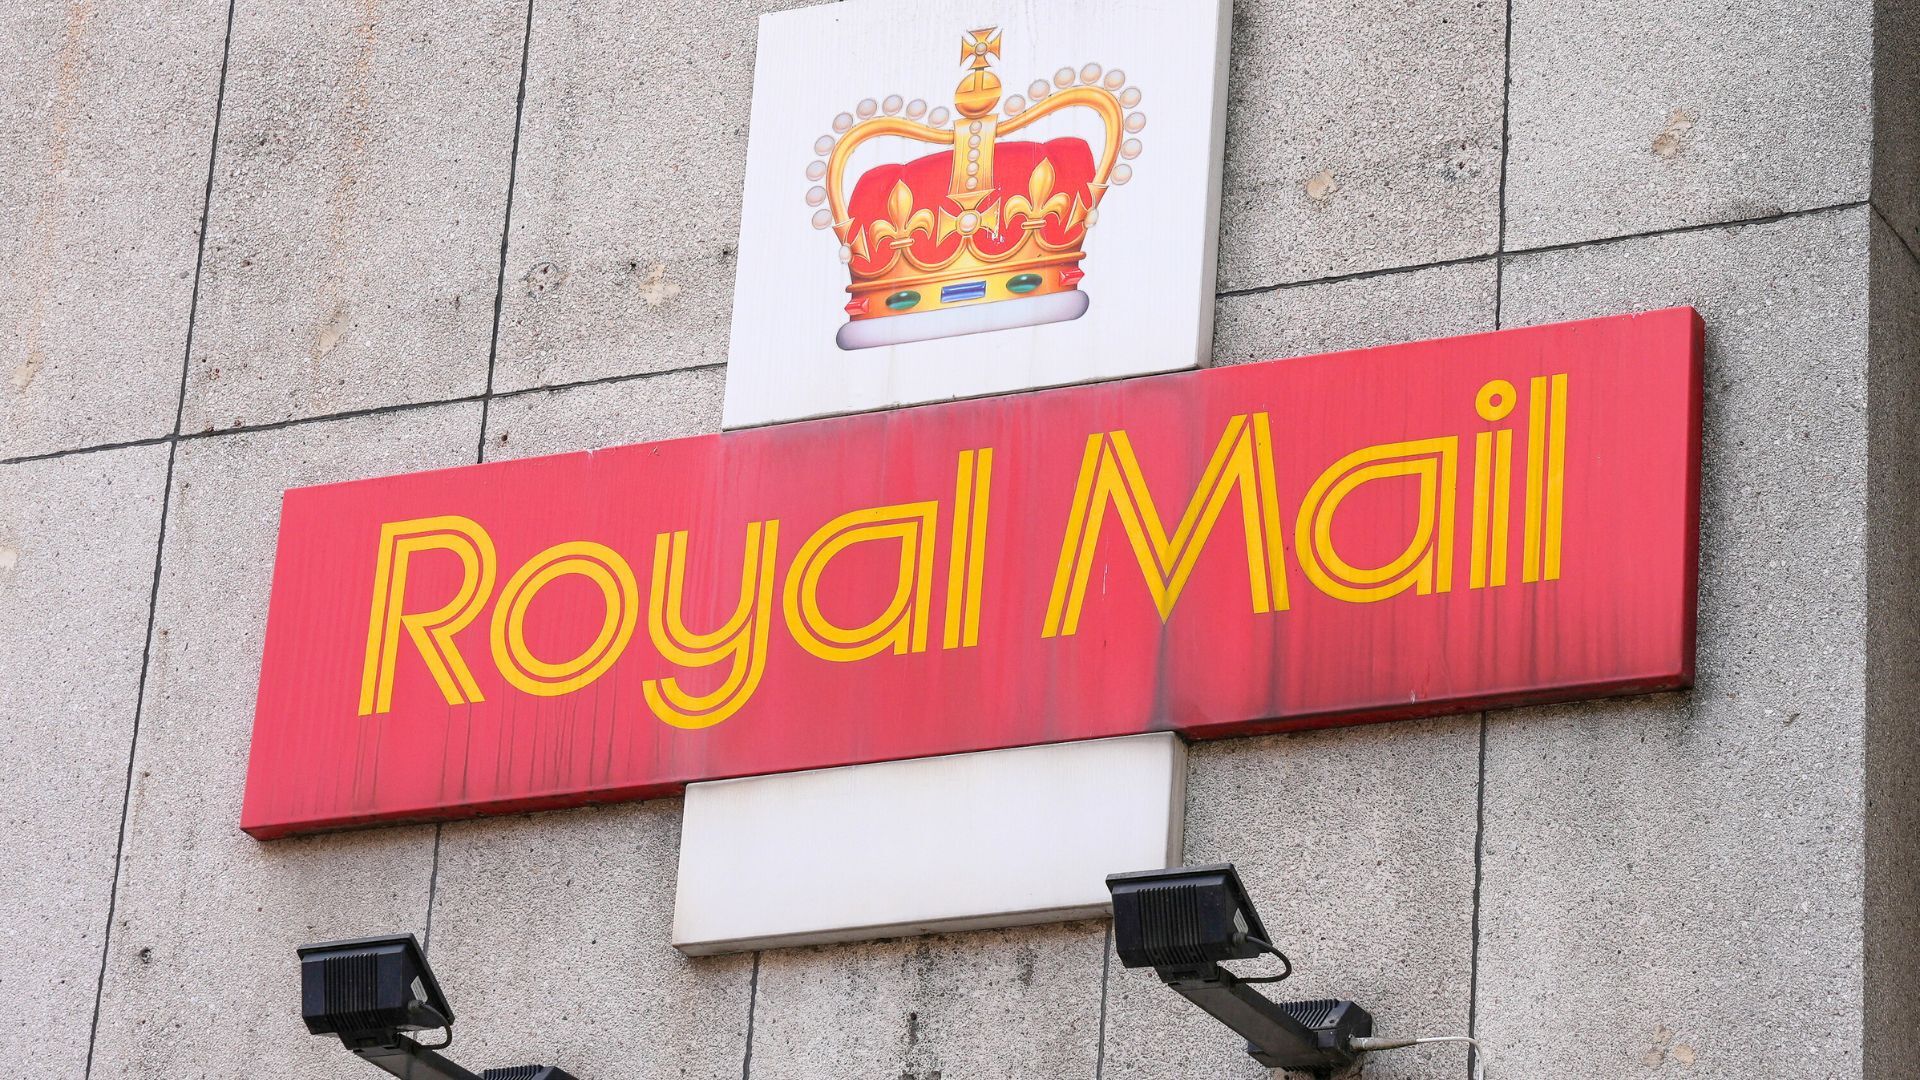 Royal Mail down: Track your deliveries with ease during online service outage